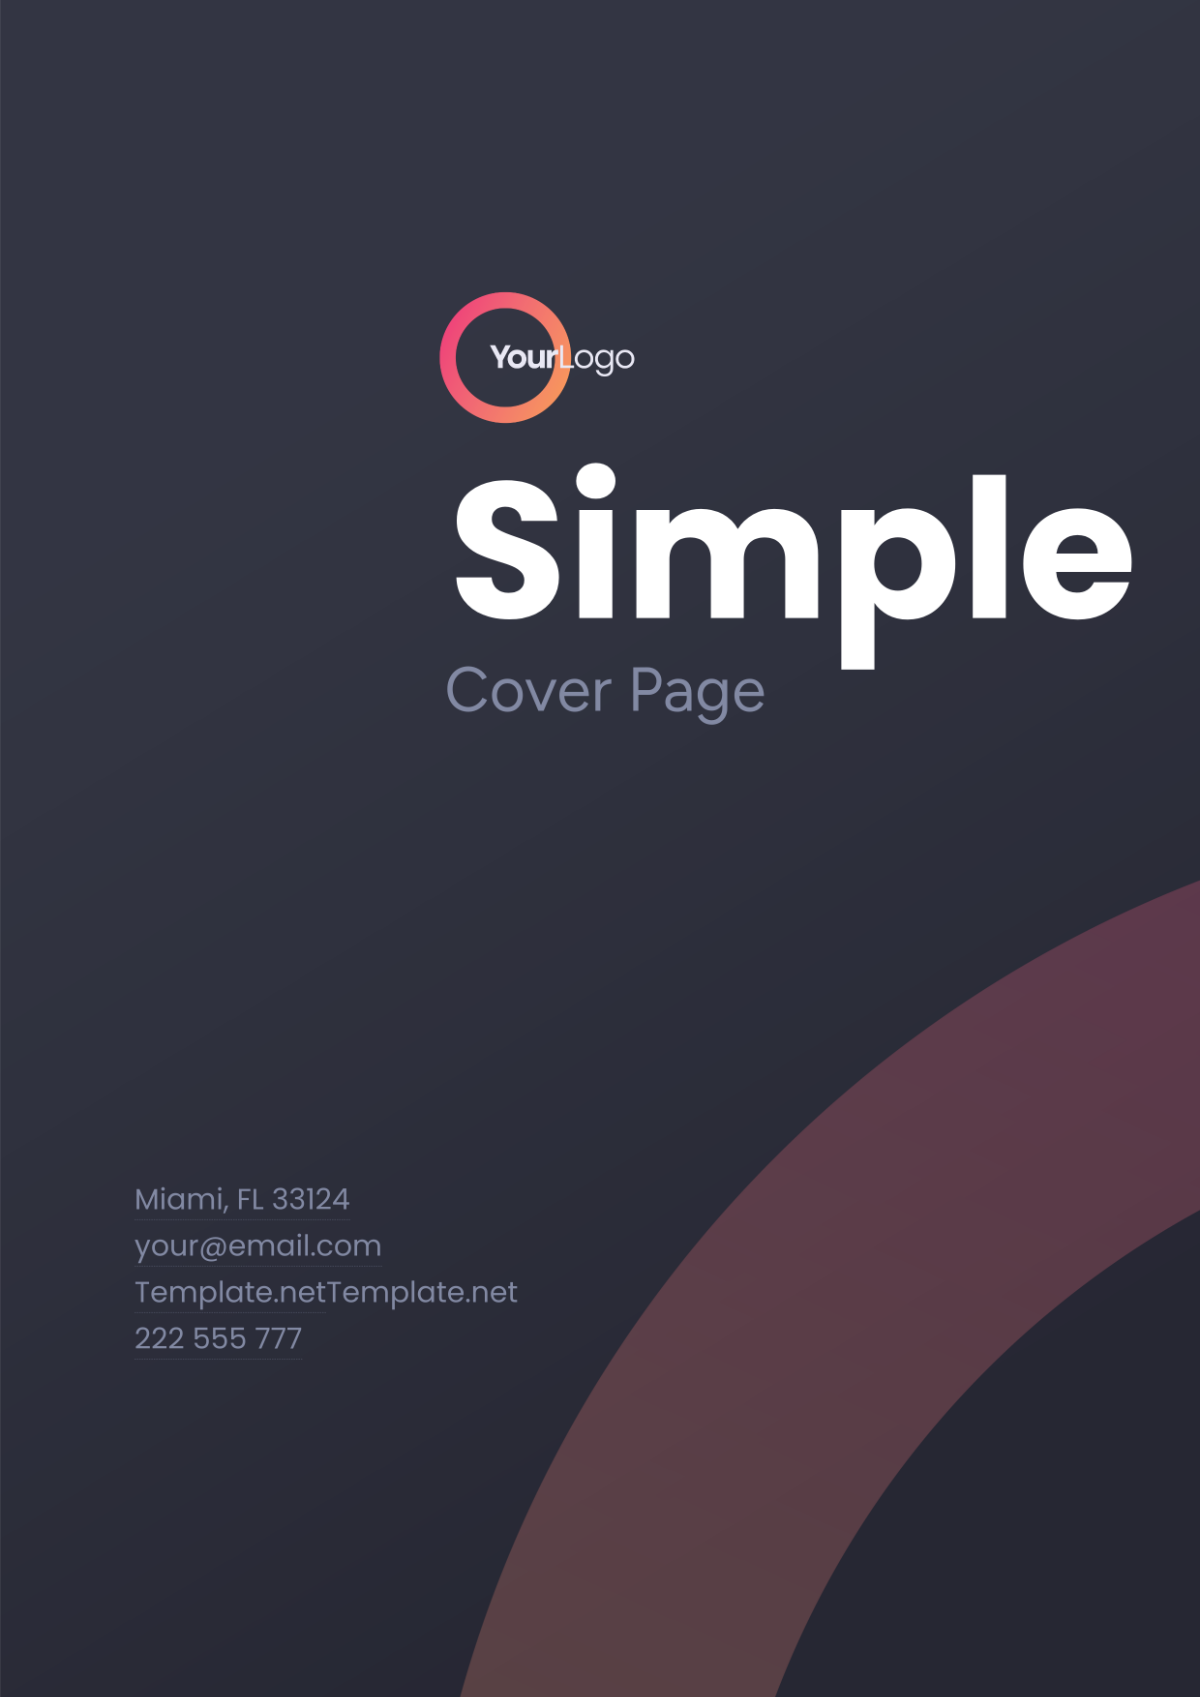 Simple Cover Page Logo